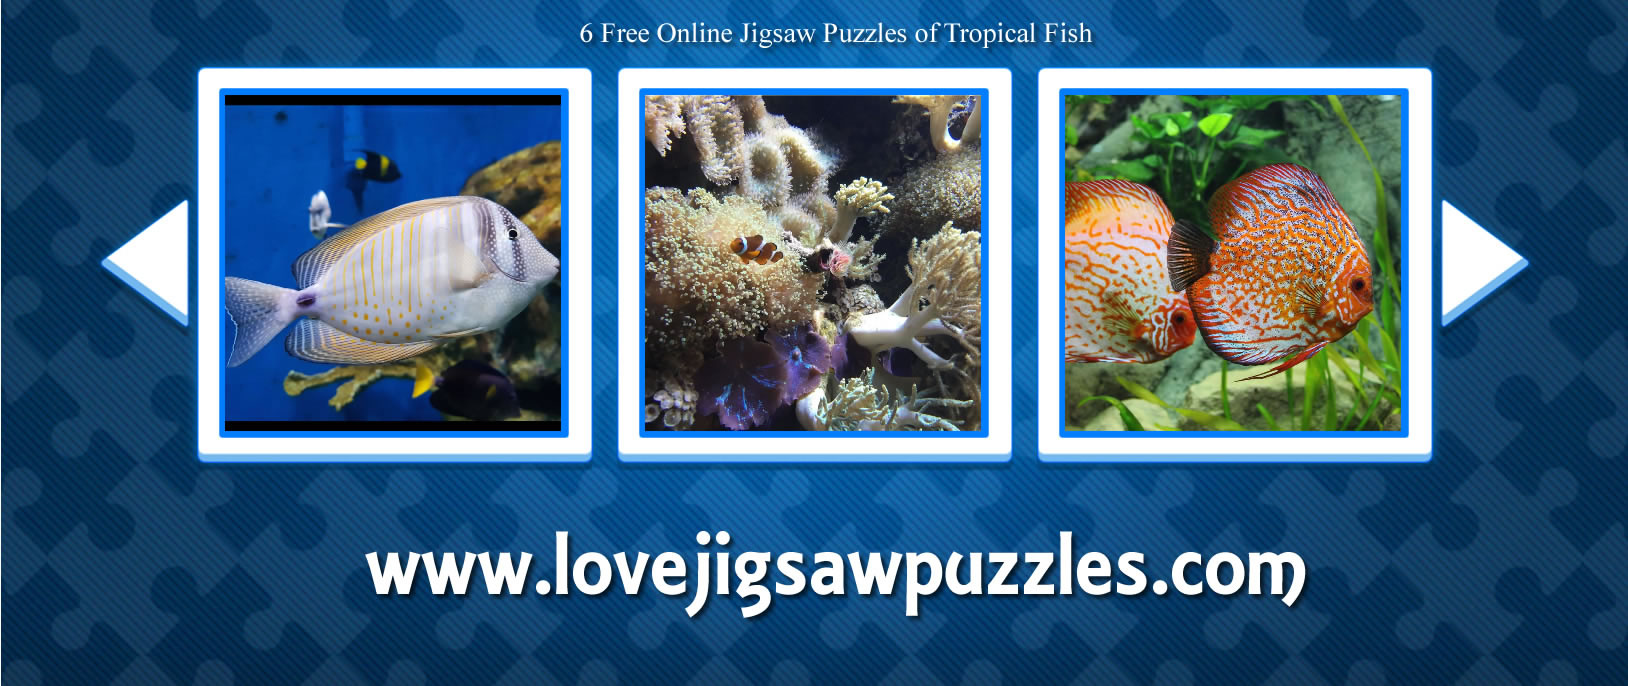 Tropical fish online jigsaw puzzle